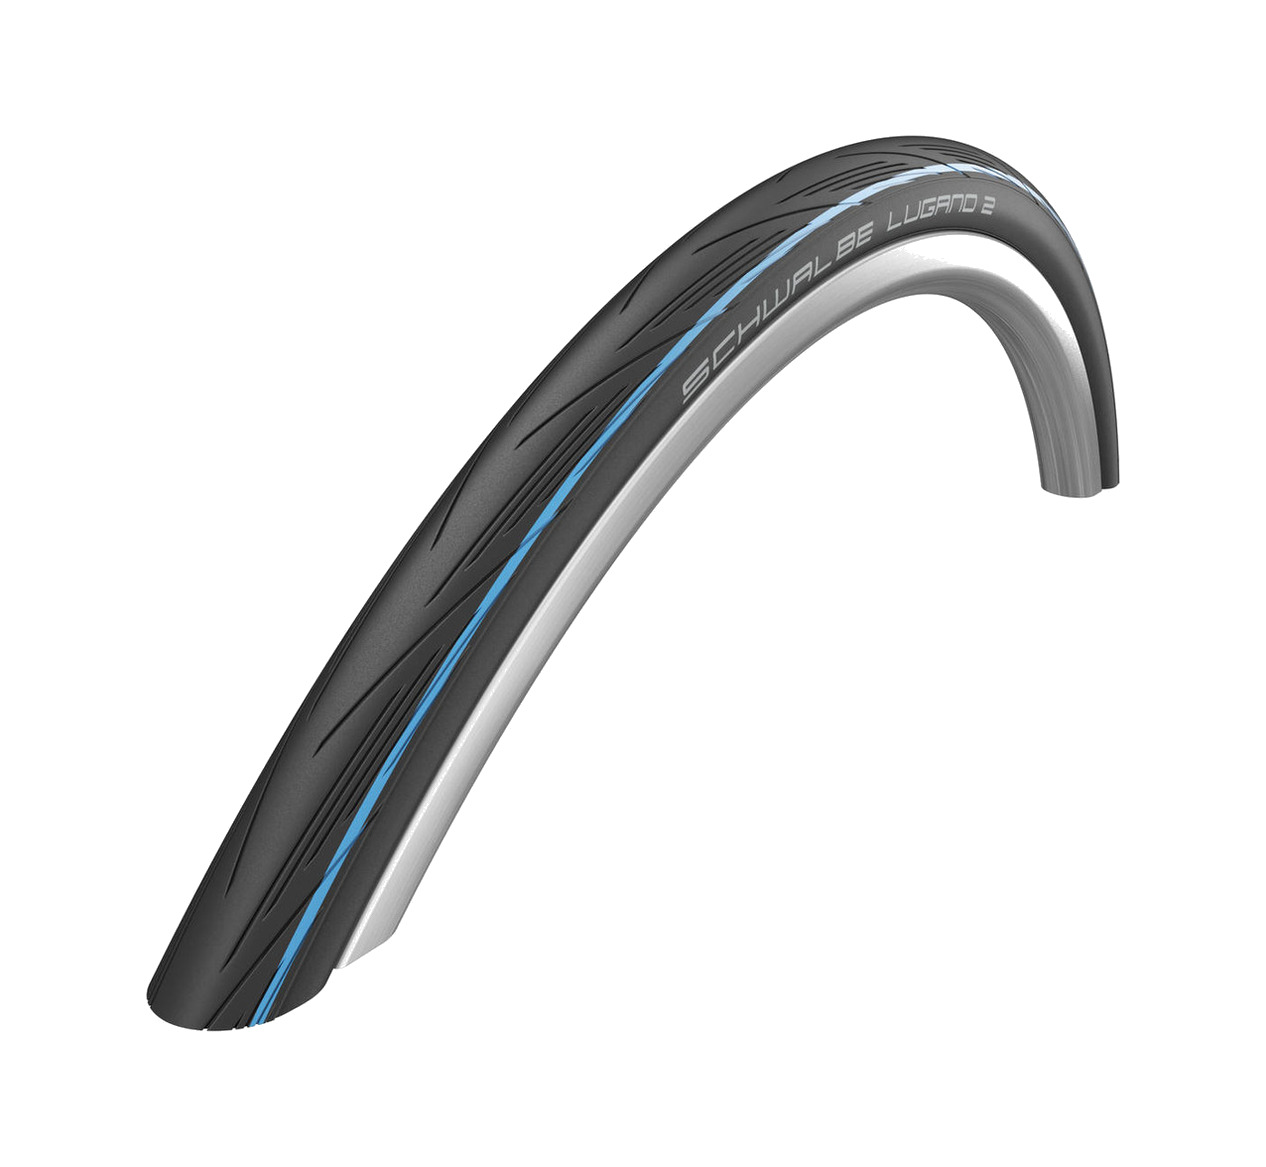 Rigid tire for bicycle LUGANO II 700x25C HS471 ACTIVE LINE K-GUARD SIC 25-622 - Picture 1 of 1